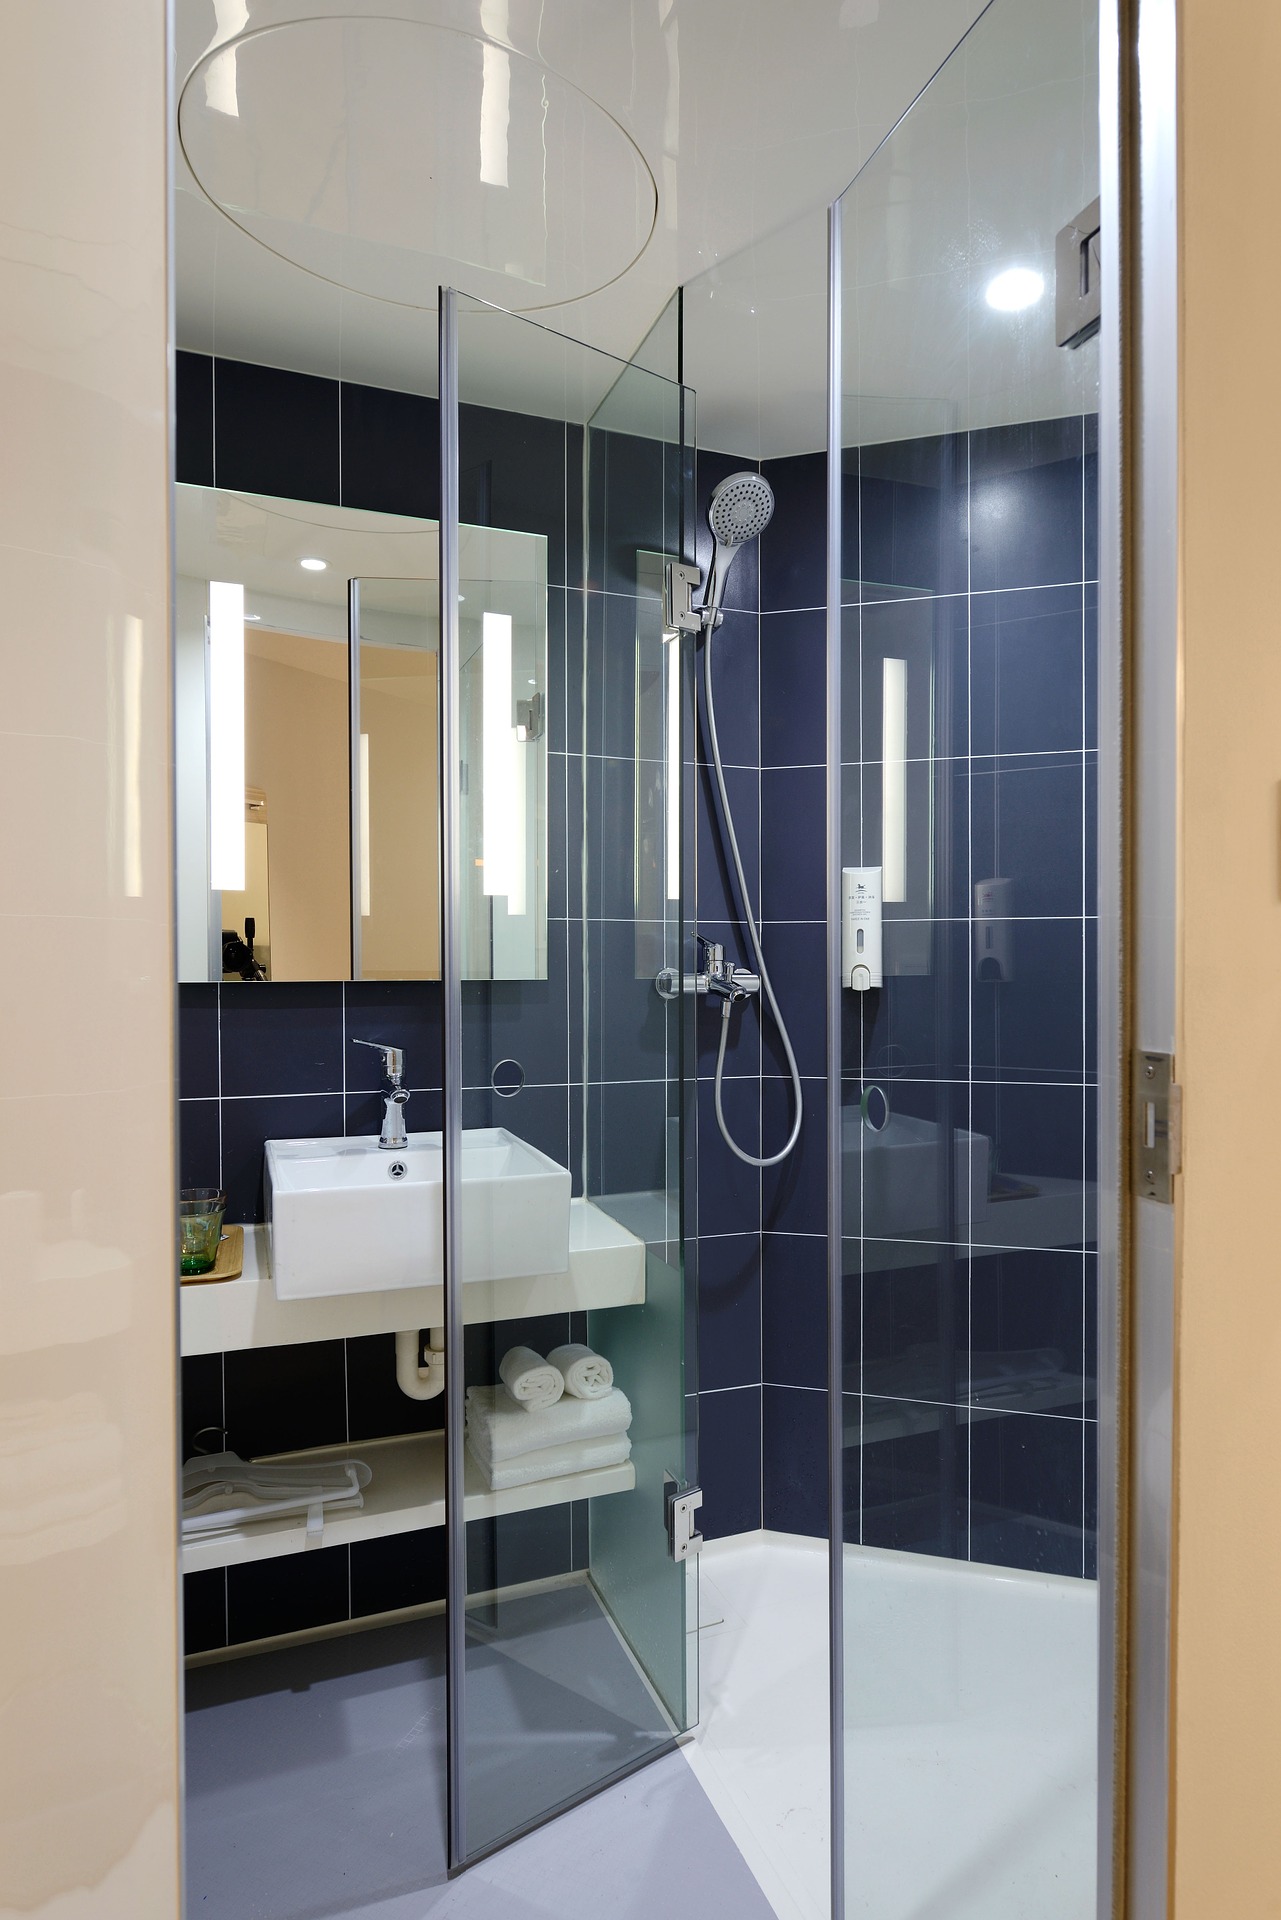 A Frameless Swinging Shower Door Hinged From The Stationary Panel Which Closes Against A Large Return Glass Shower Door Hinge Shower Doors Swinging Shower Door